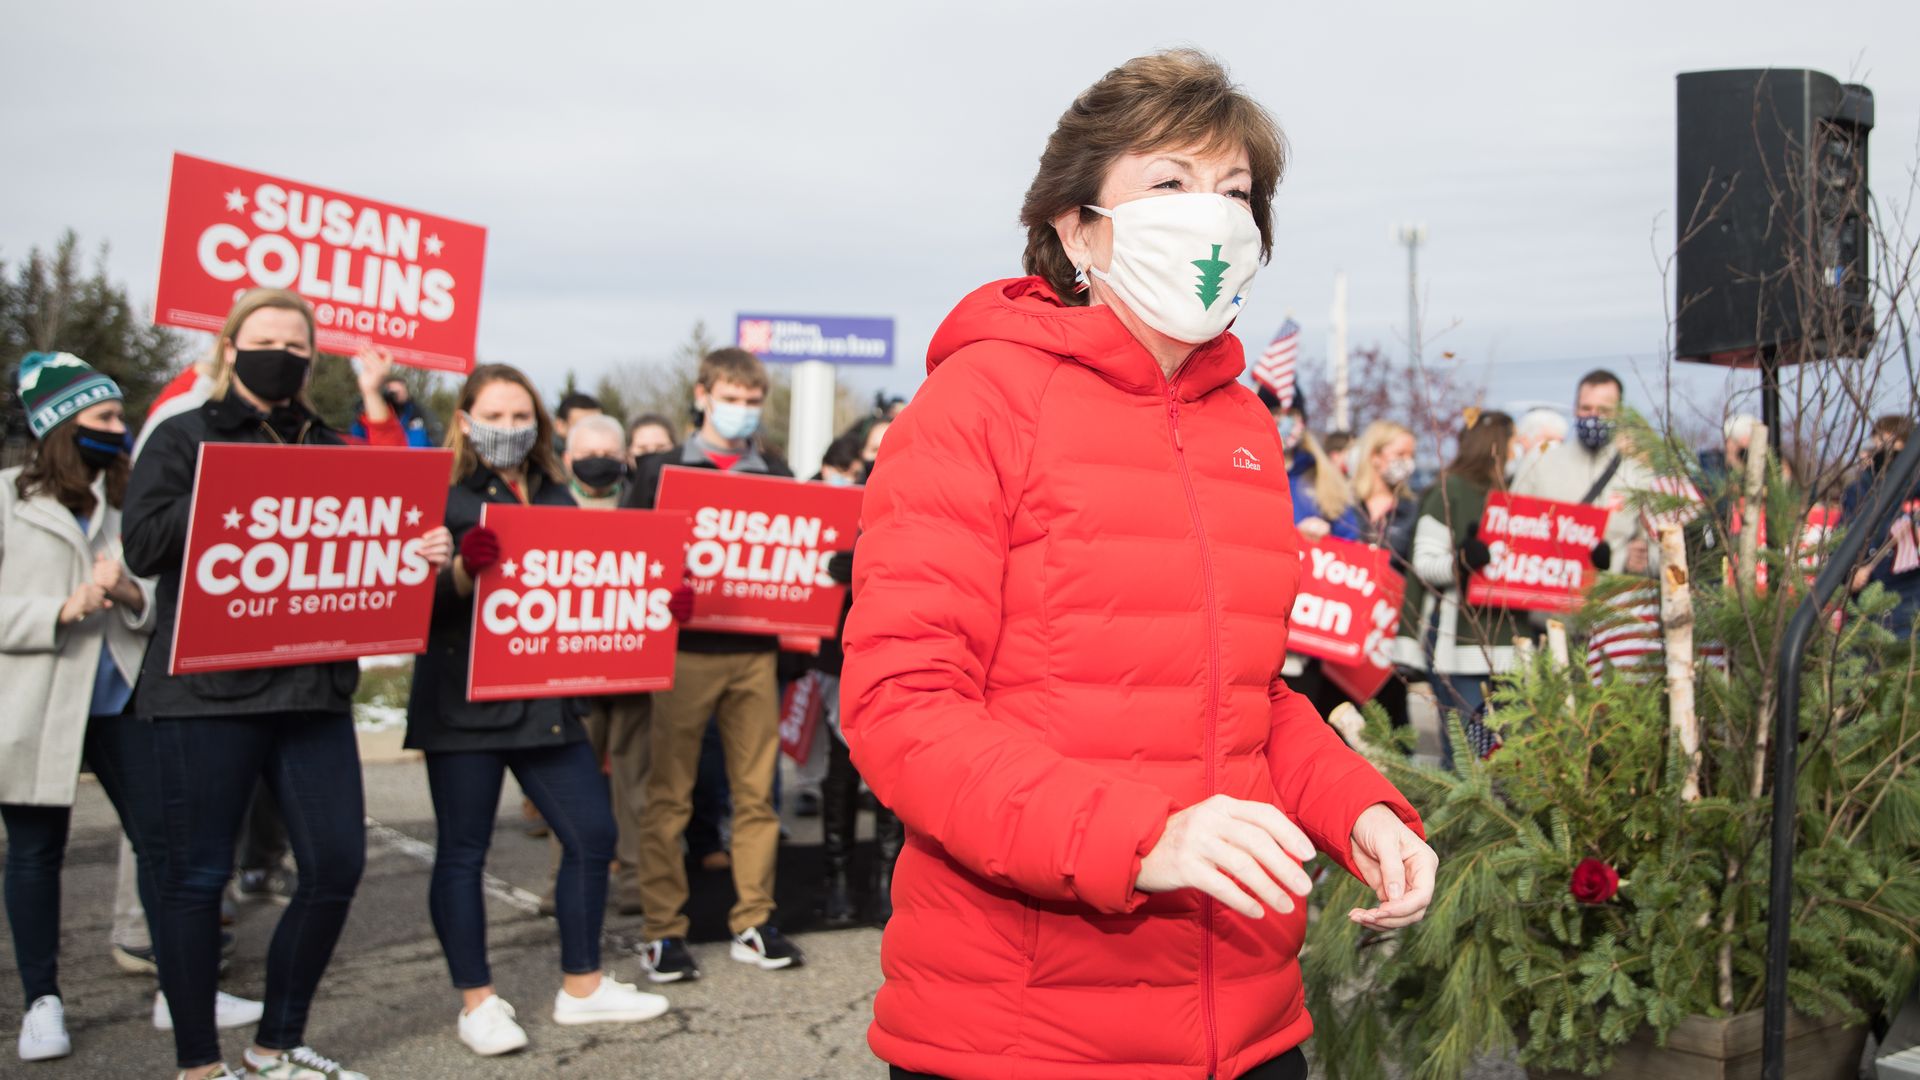 Sen. Susan Collins is seen with a group of her supporters during her 2020 reelection campaign.